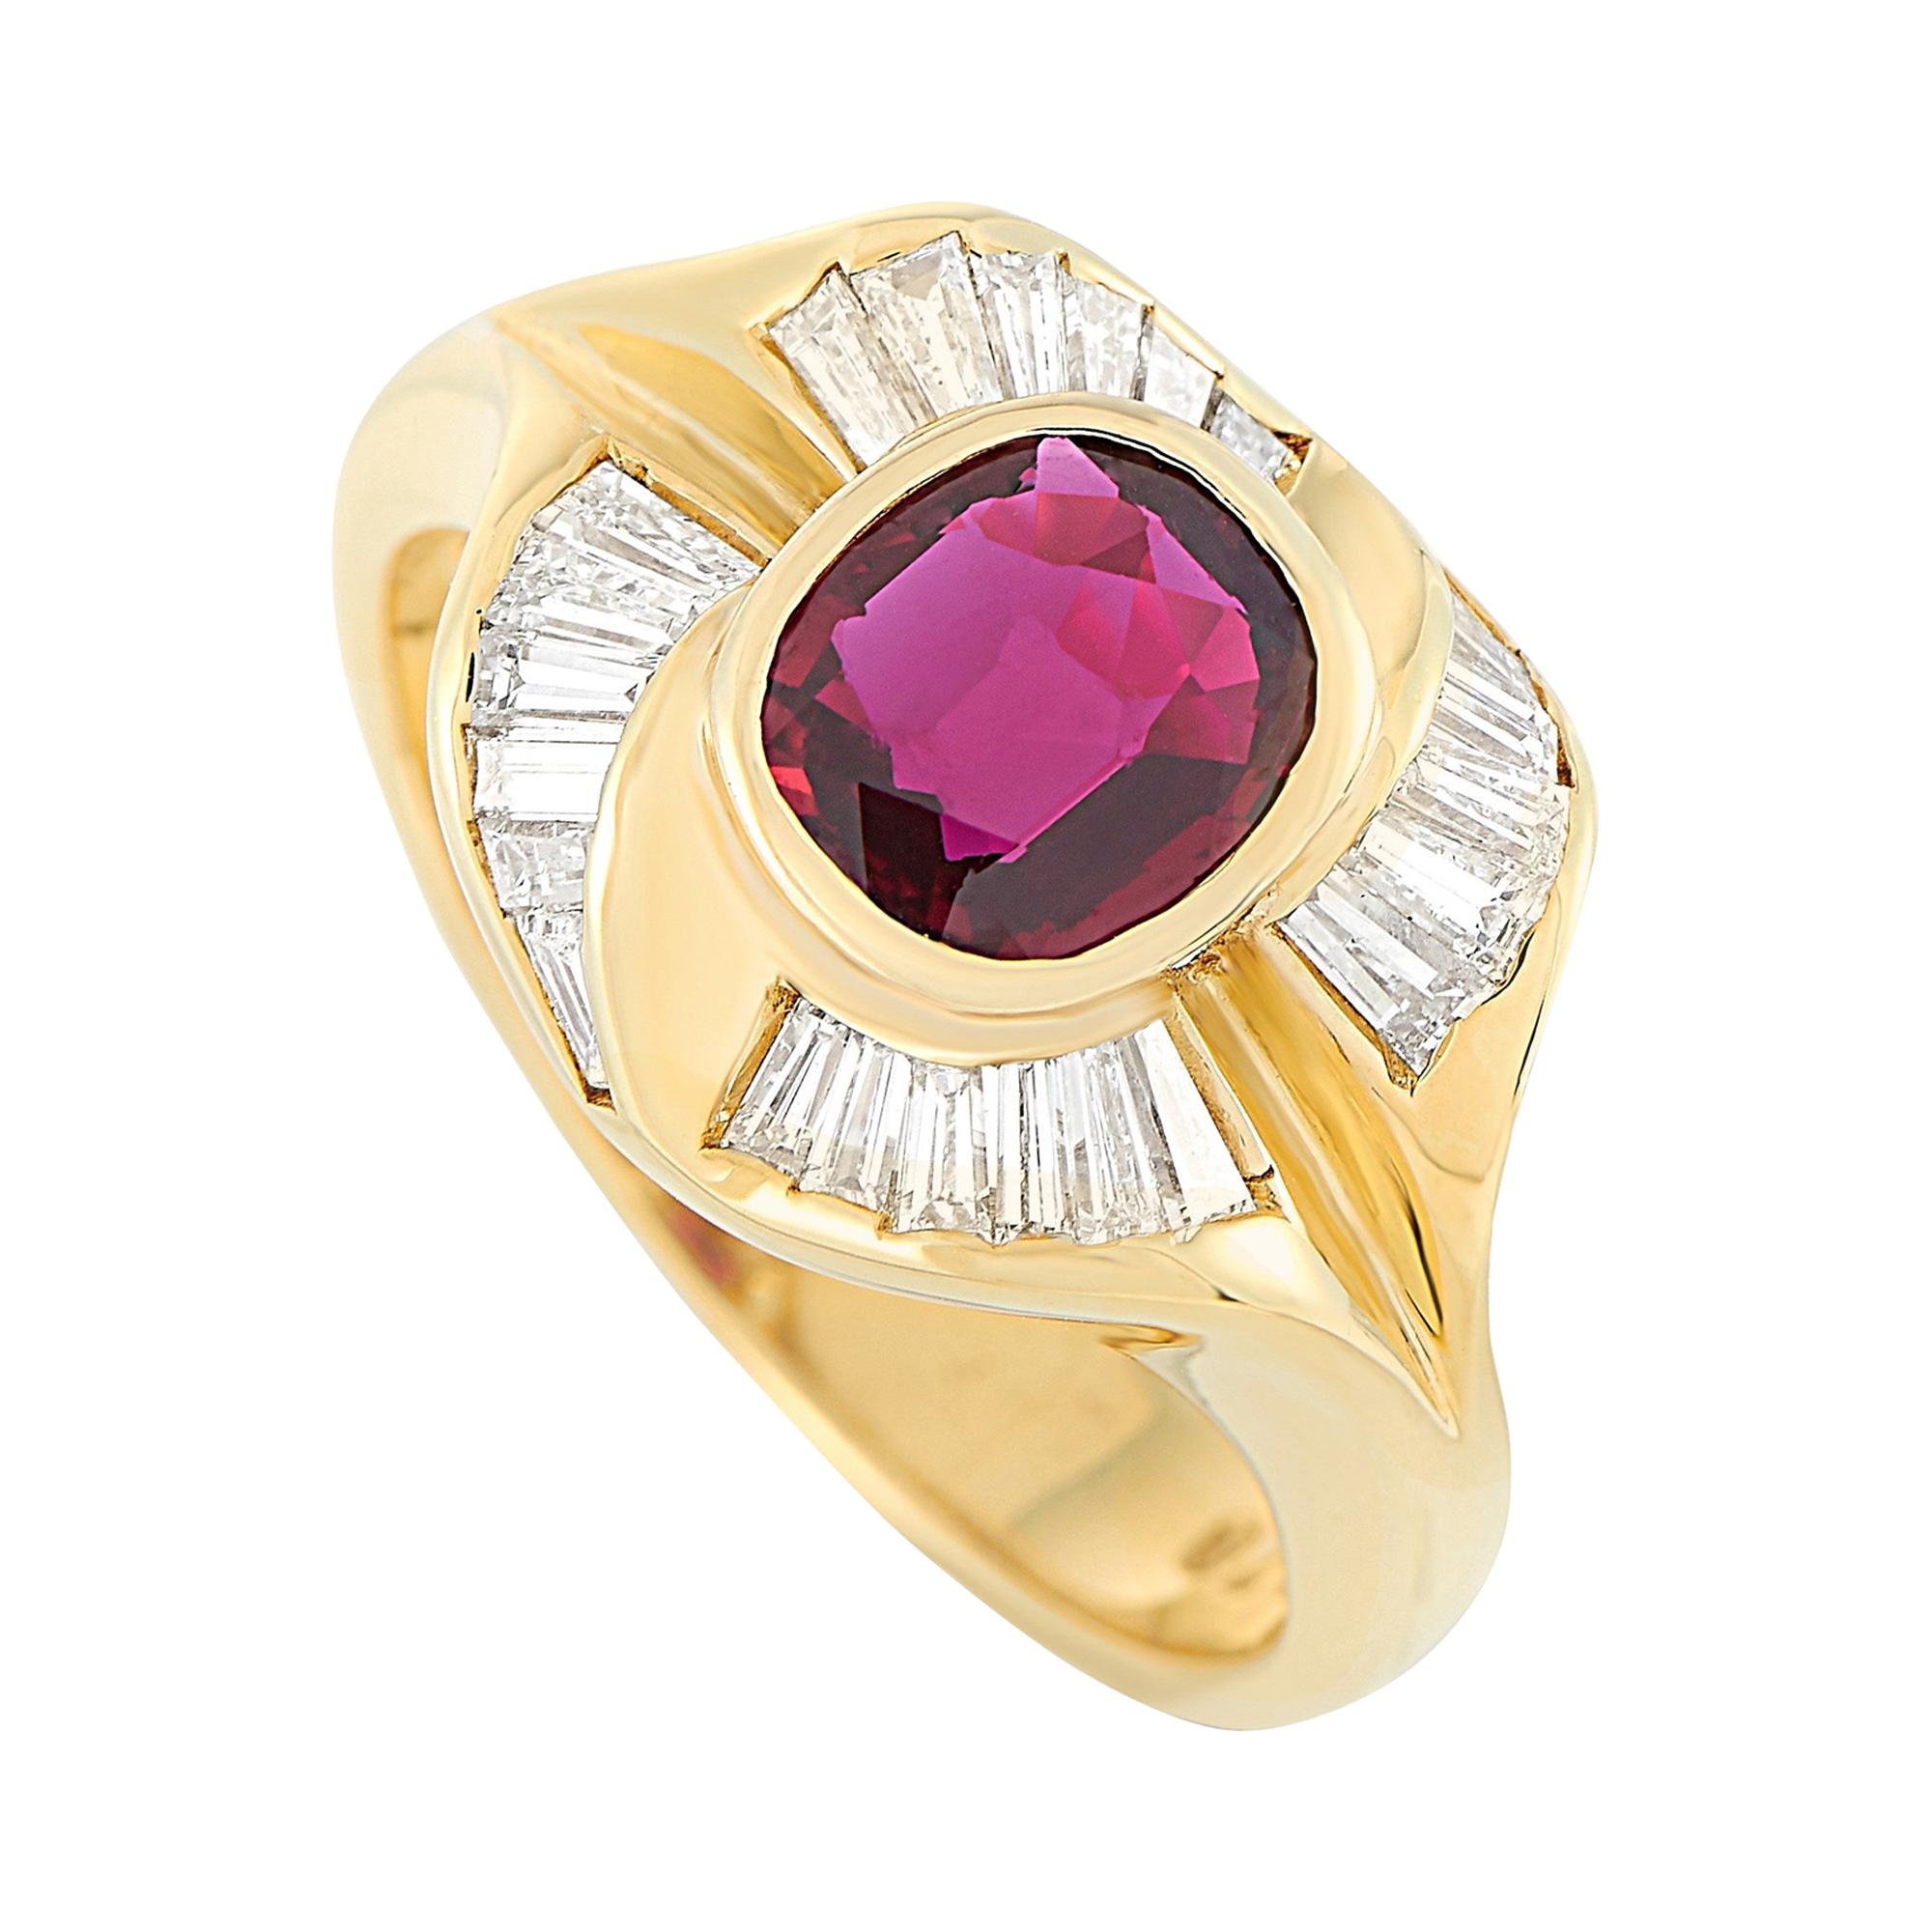 LB Exclusive 18k Yellow Gold 0.70 Ct Diamond and Ruby Ring